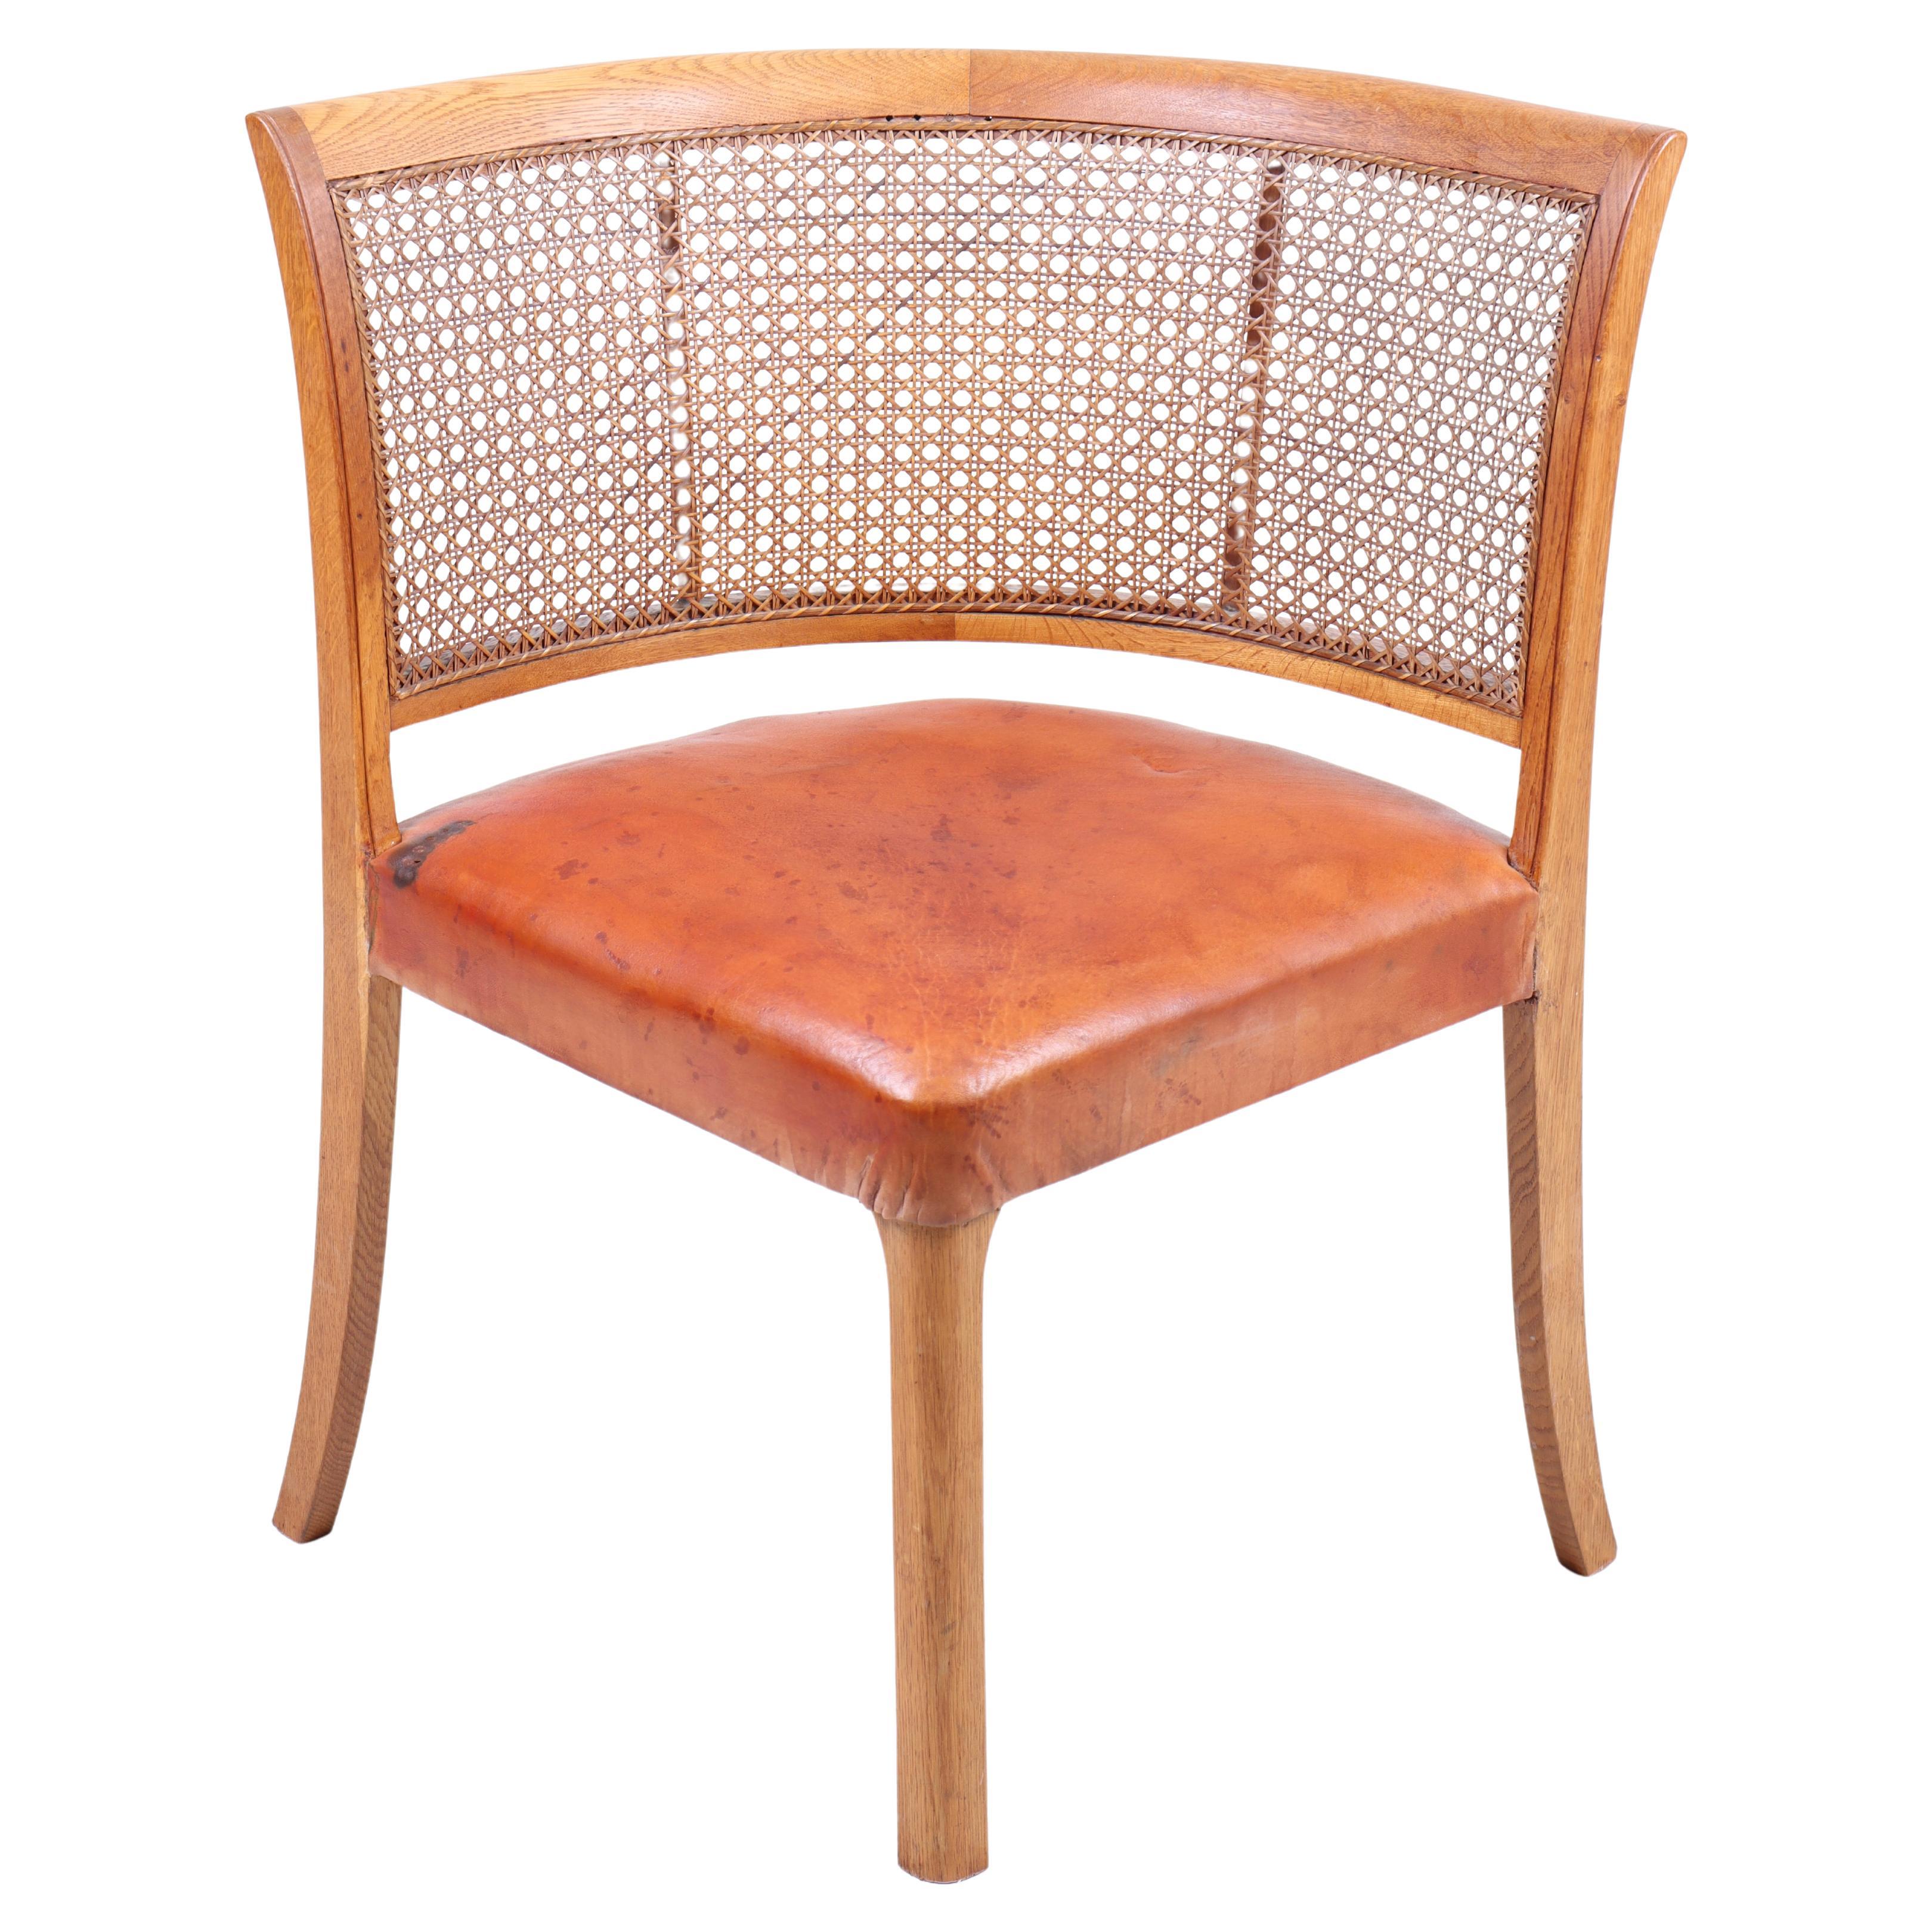 Danish Side Chair in Oak and Cognac Leather, 1940s For Sale